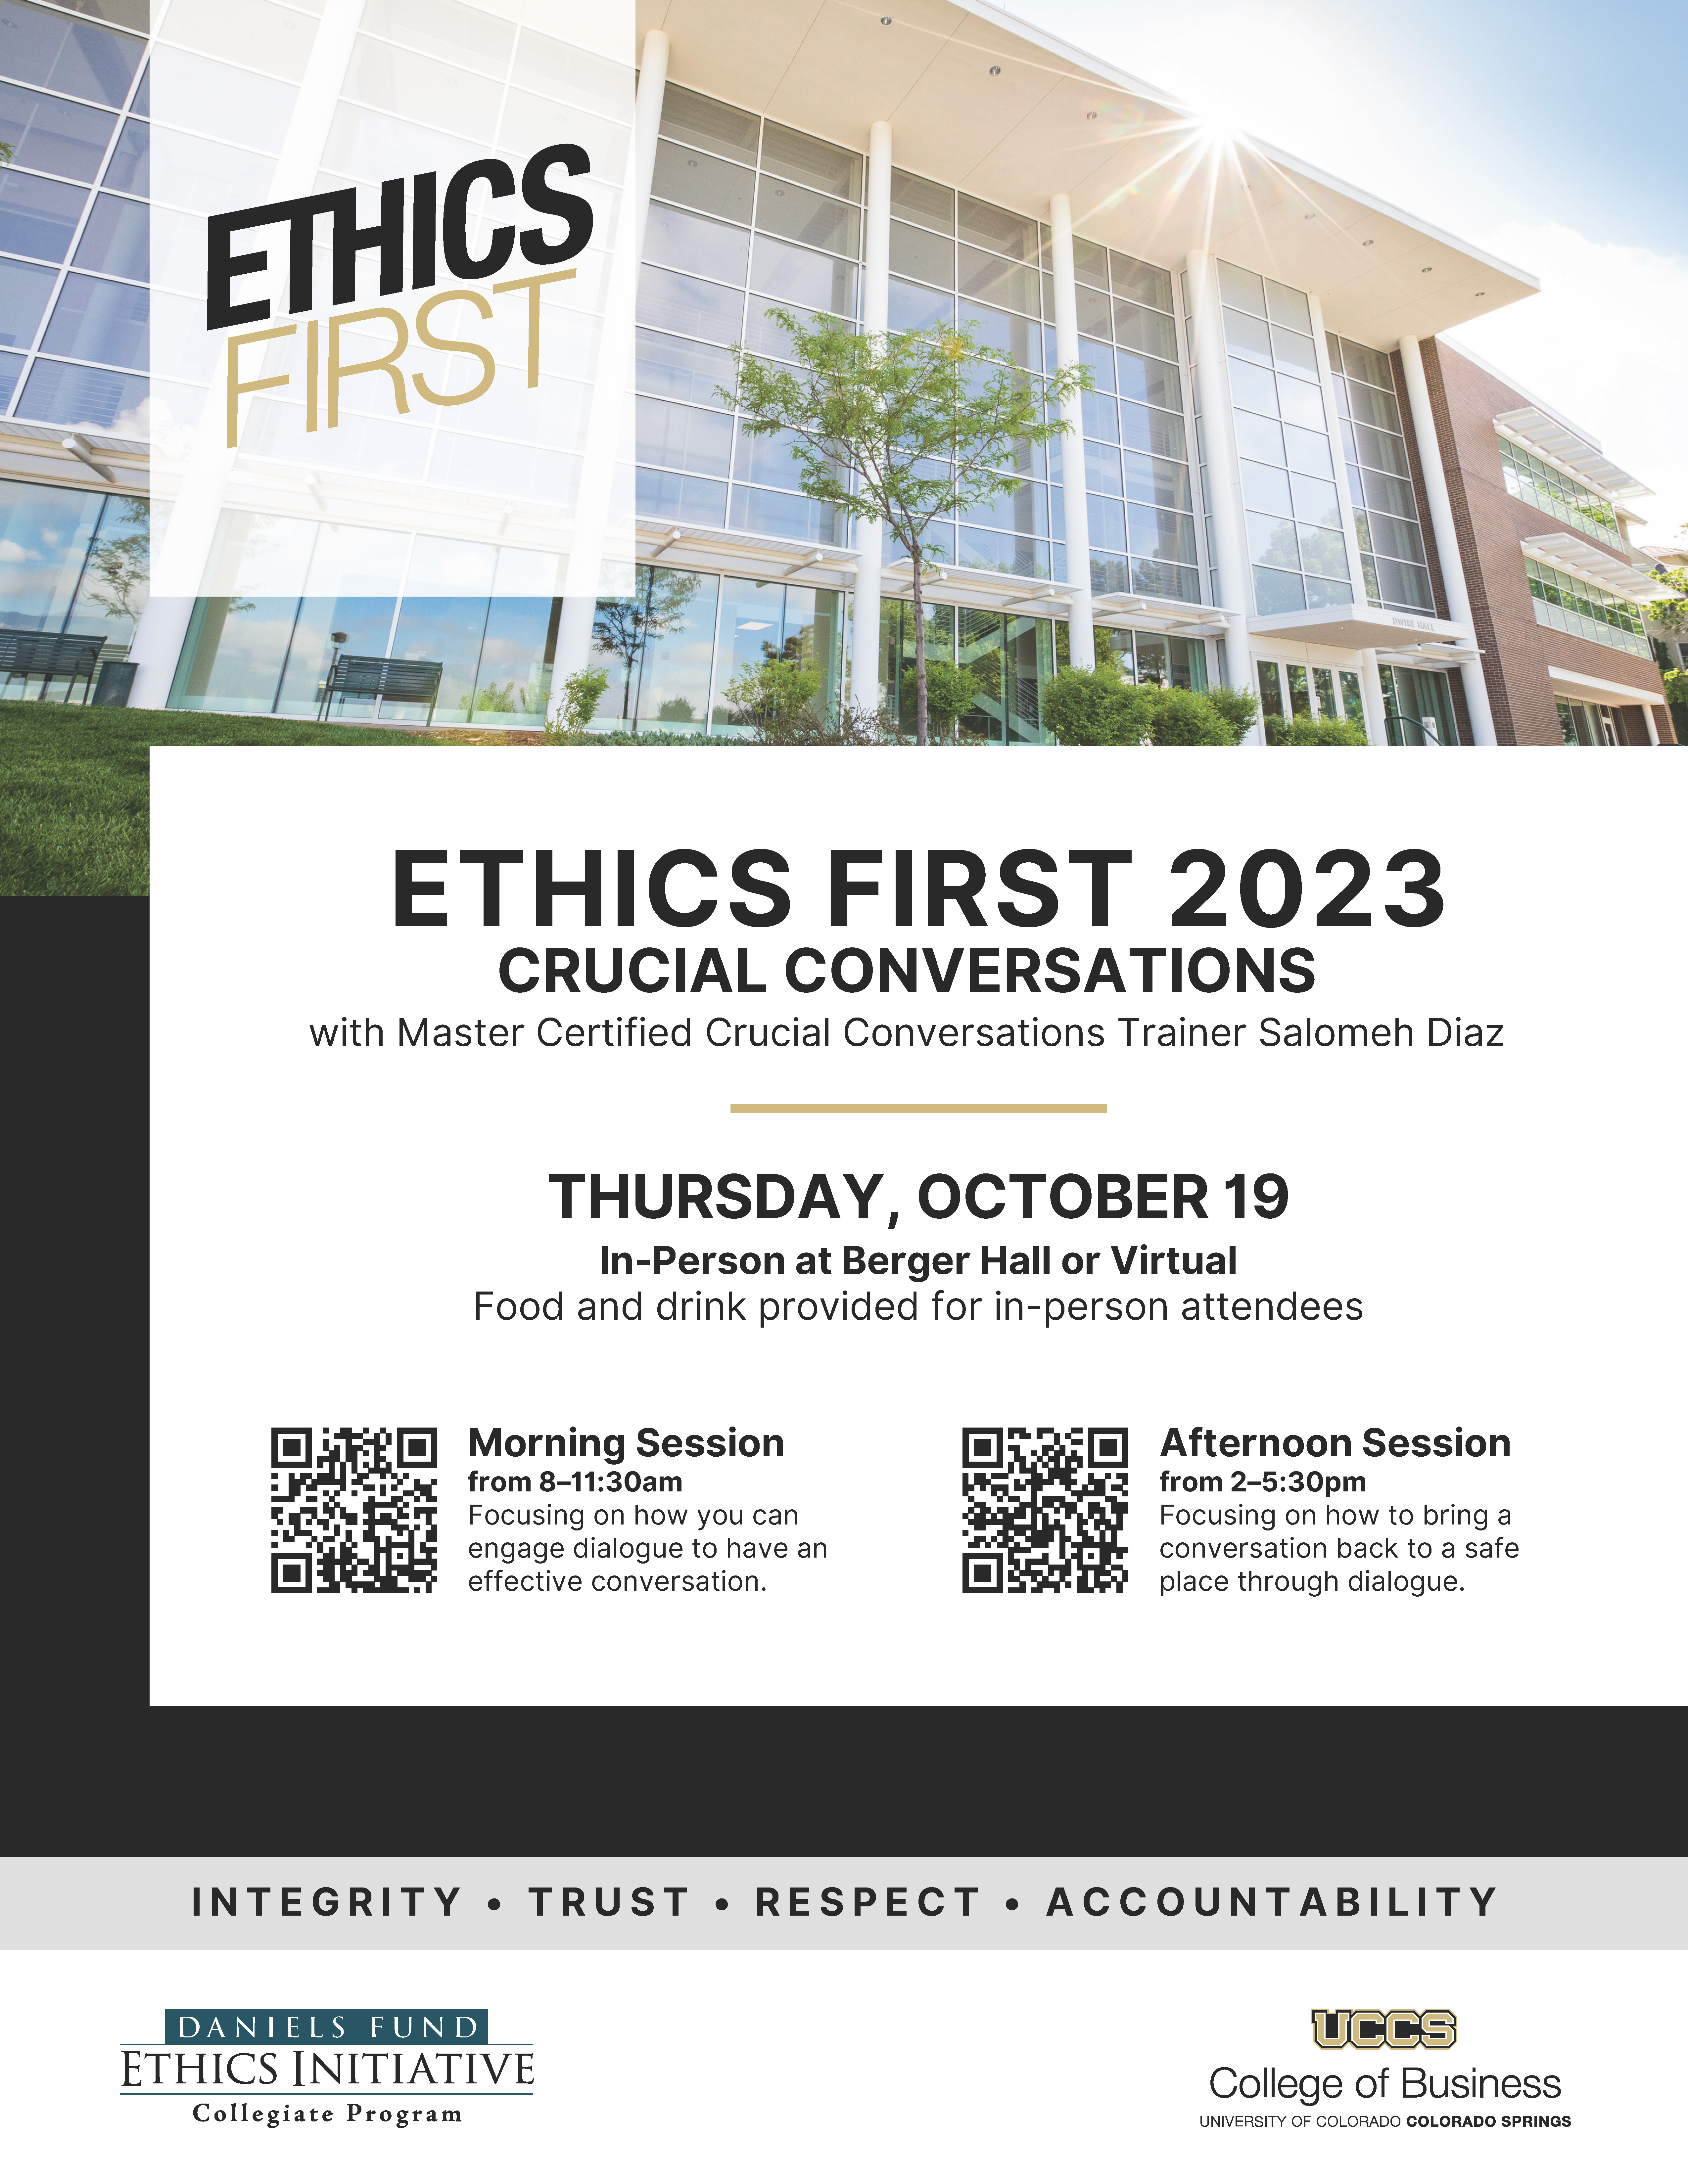 ethics first 2023 crucial conversations